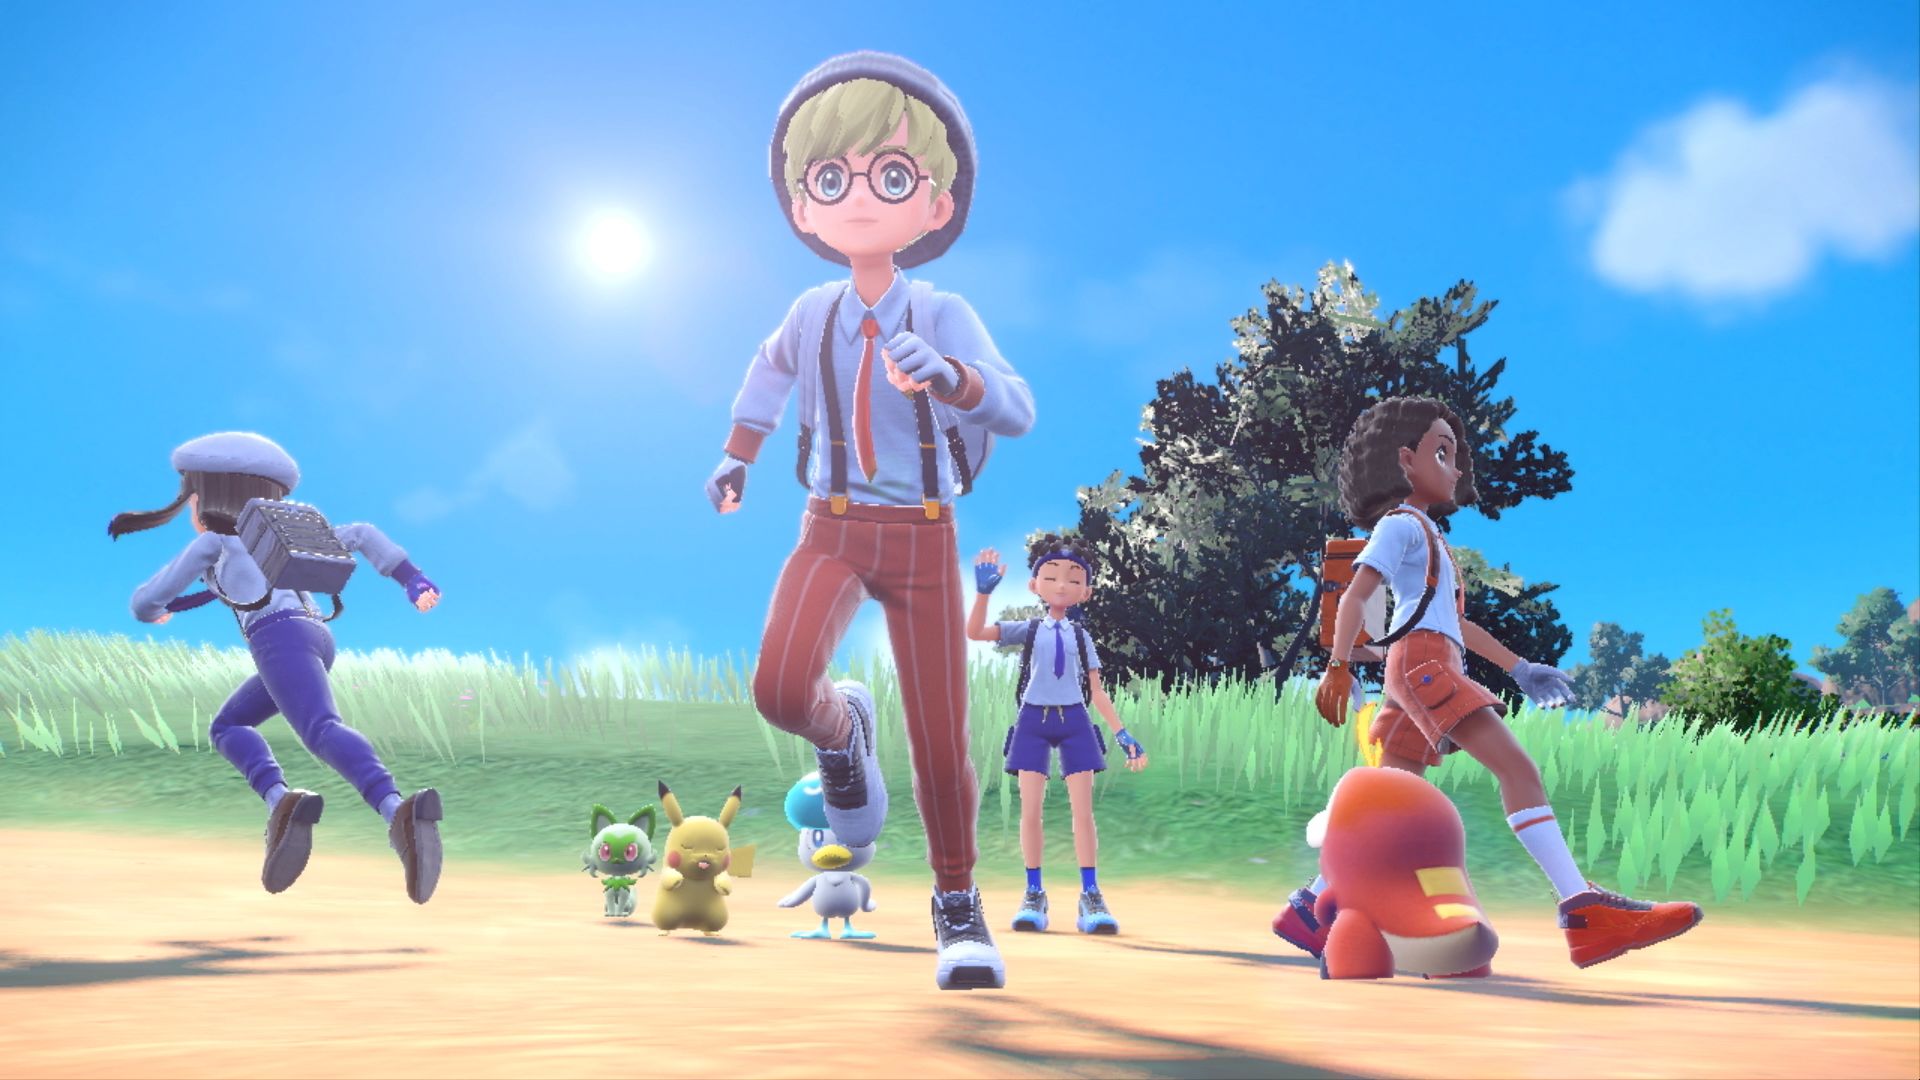 Pokémon Presents August 2022 Date, Time, and What to Expect From the Event